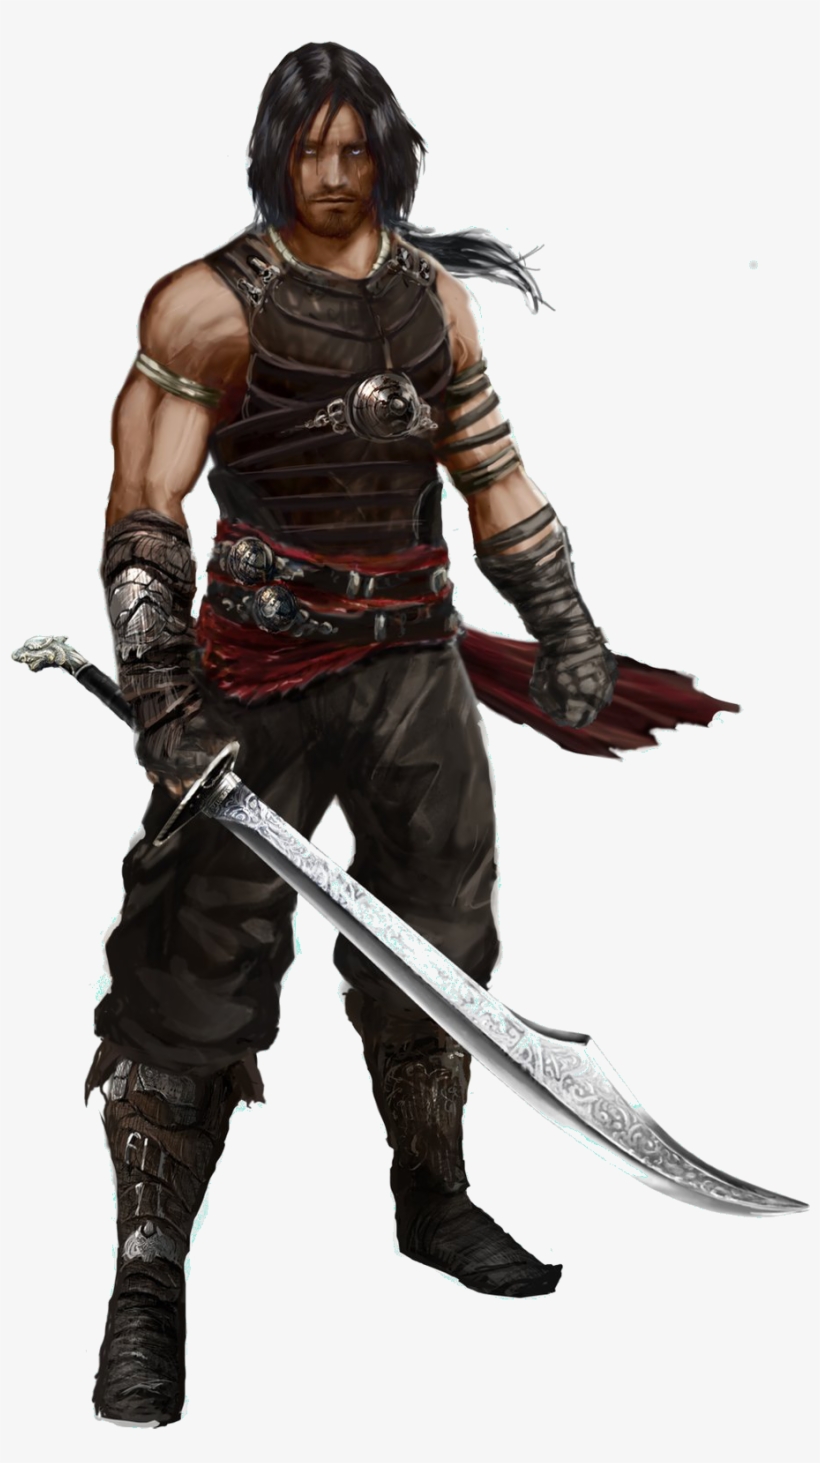 Strong, Warrior, Leader Of His People - Prince Of Persia The Forgotten Sands Dastan, transparent png #4119554